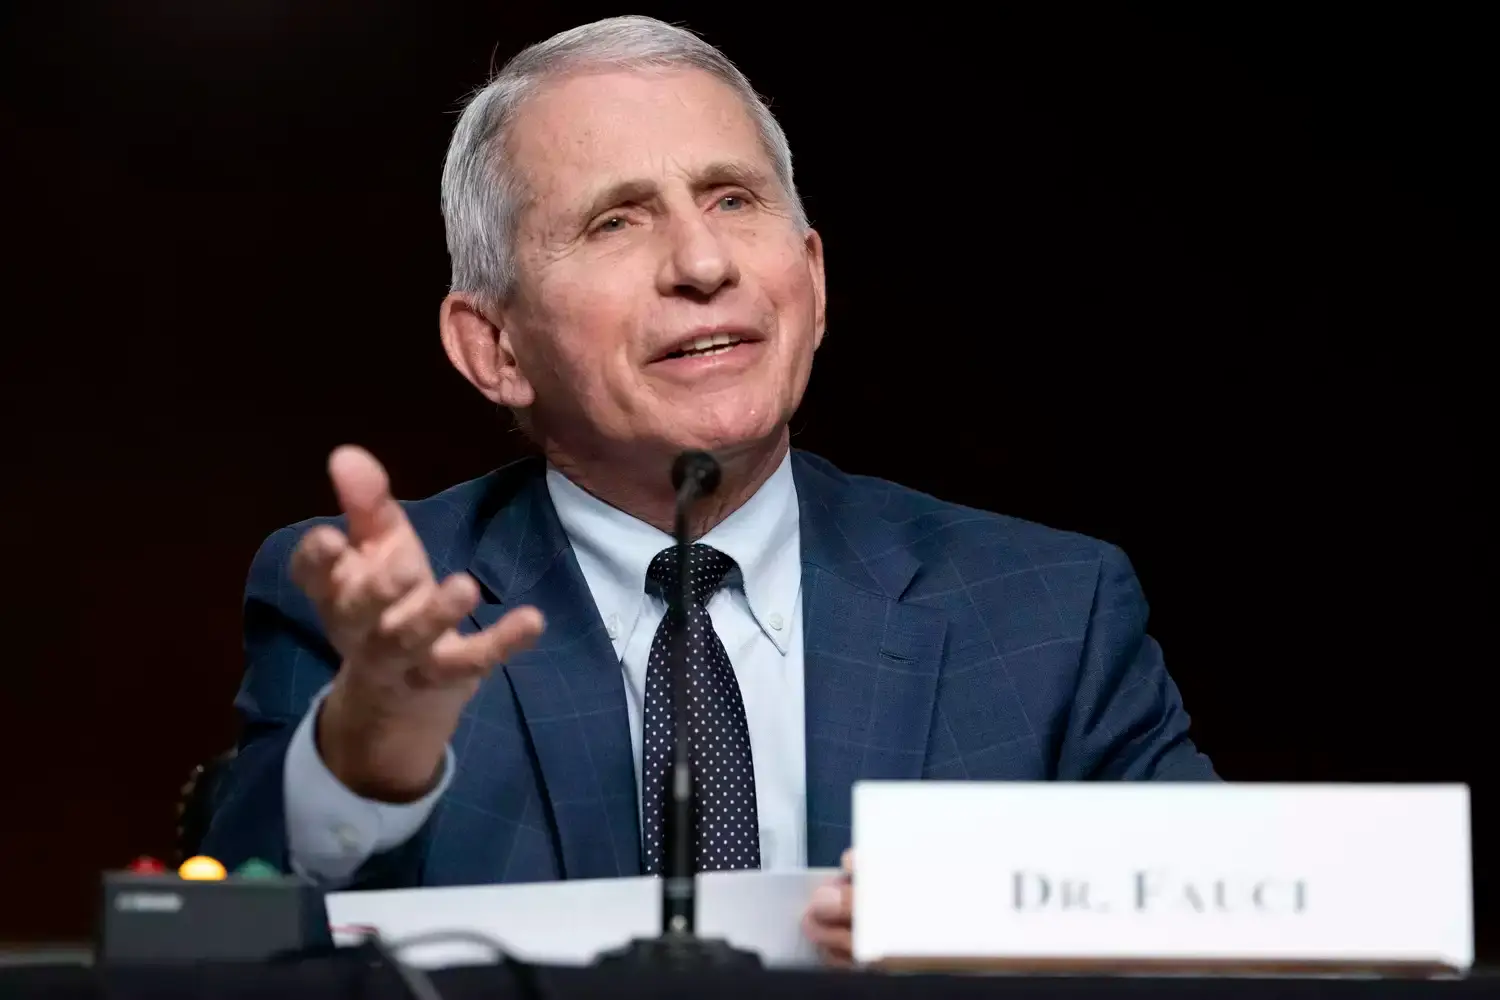 Top US Medical Advisor Dr Anthony Fauci tests positive for COVID-19